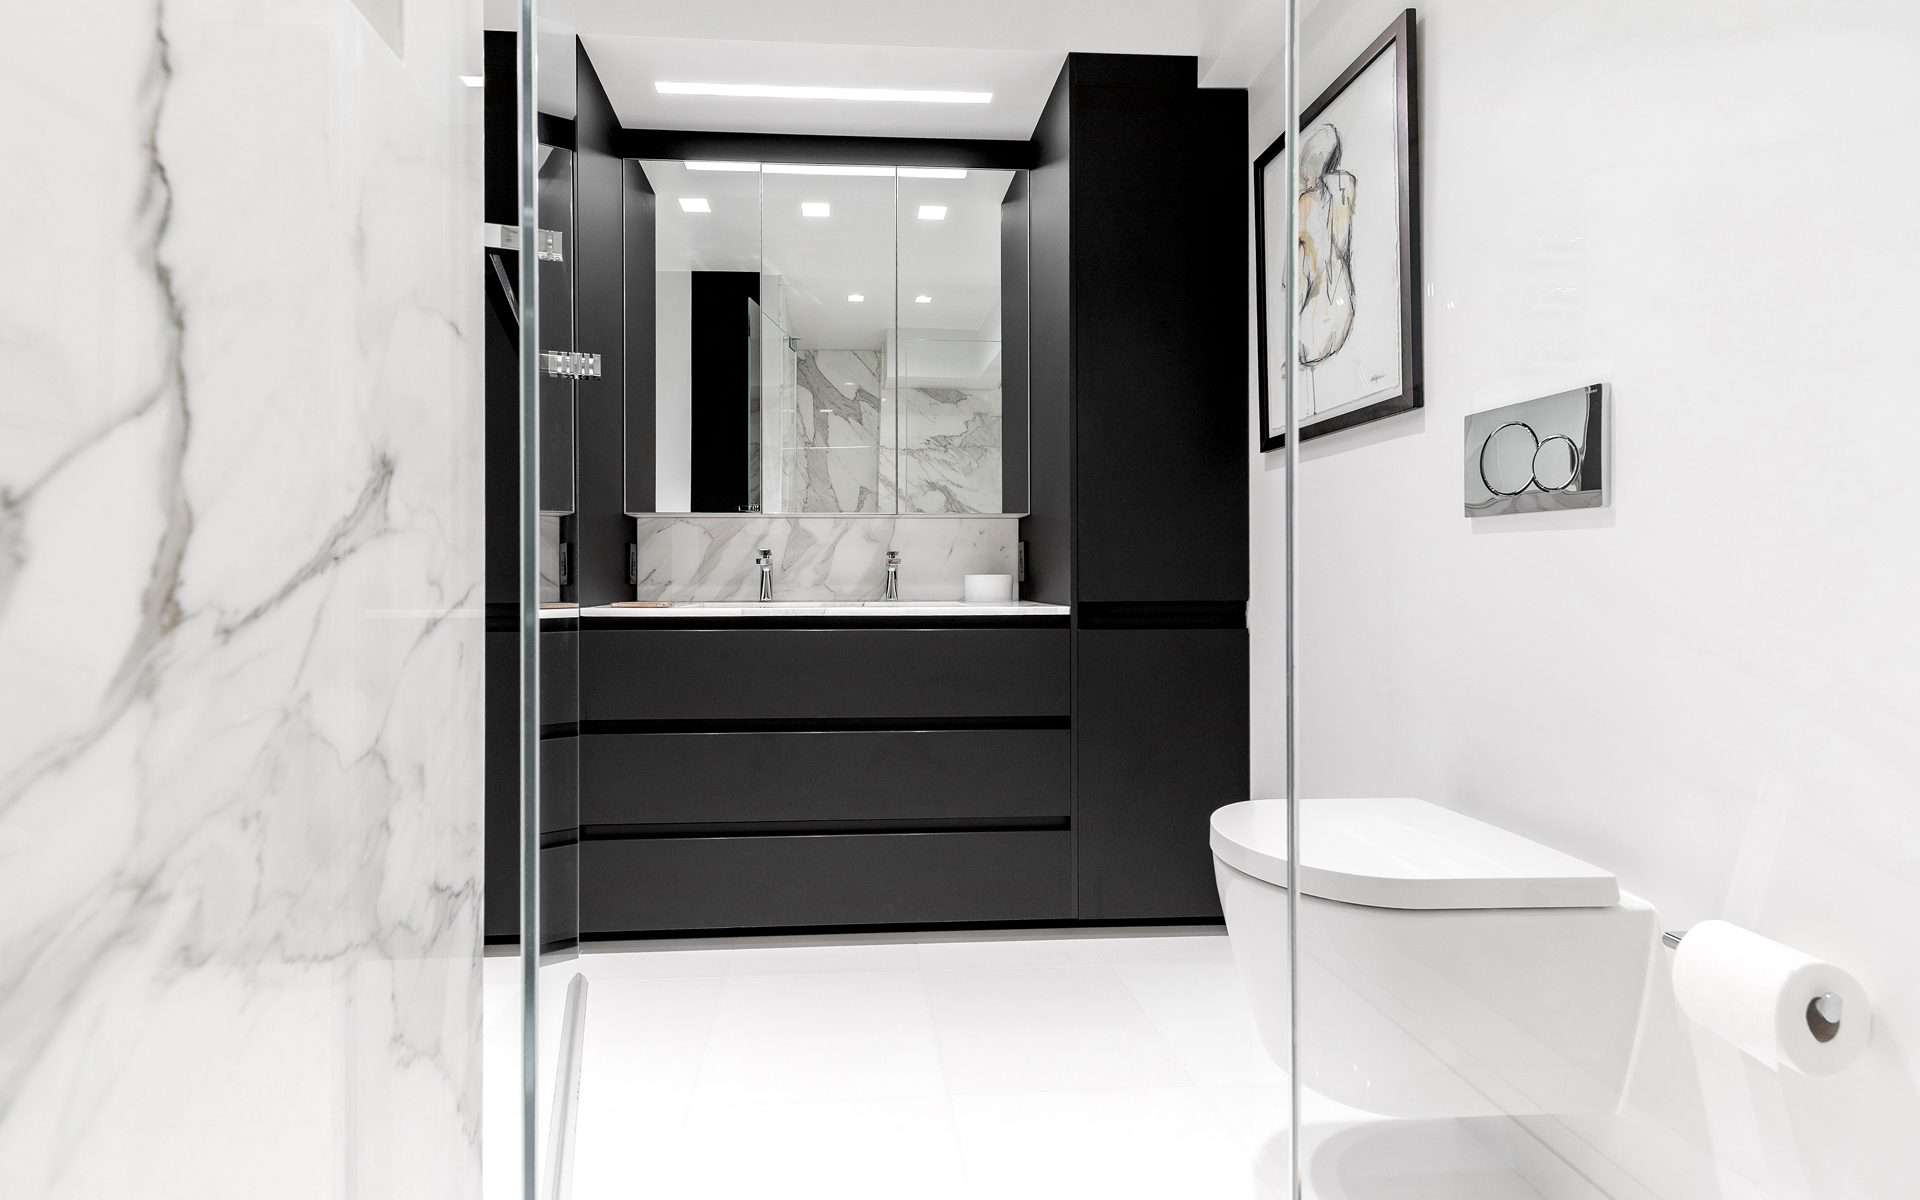 Dramatic bathroom features sleek black handle-less caninetry, marbled walls and modern bathroom appliances.